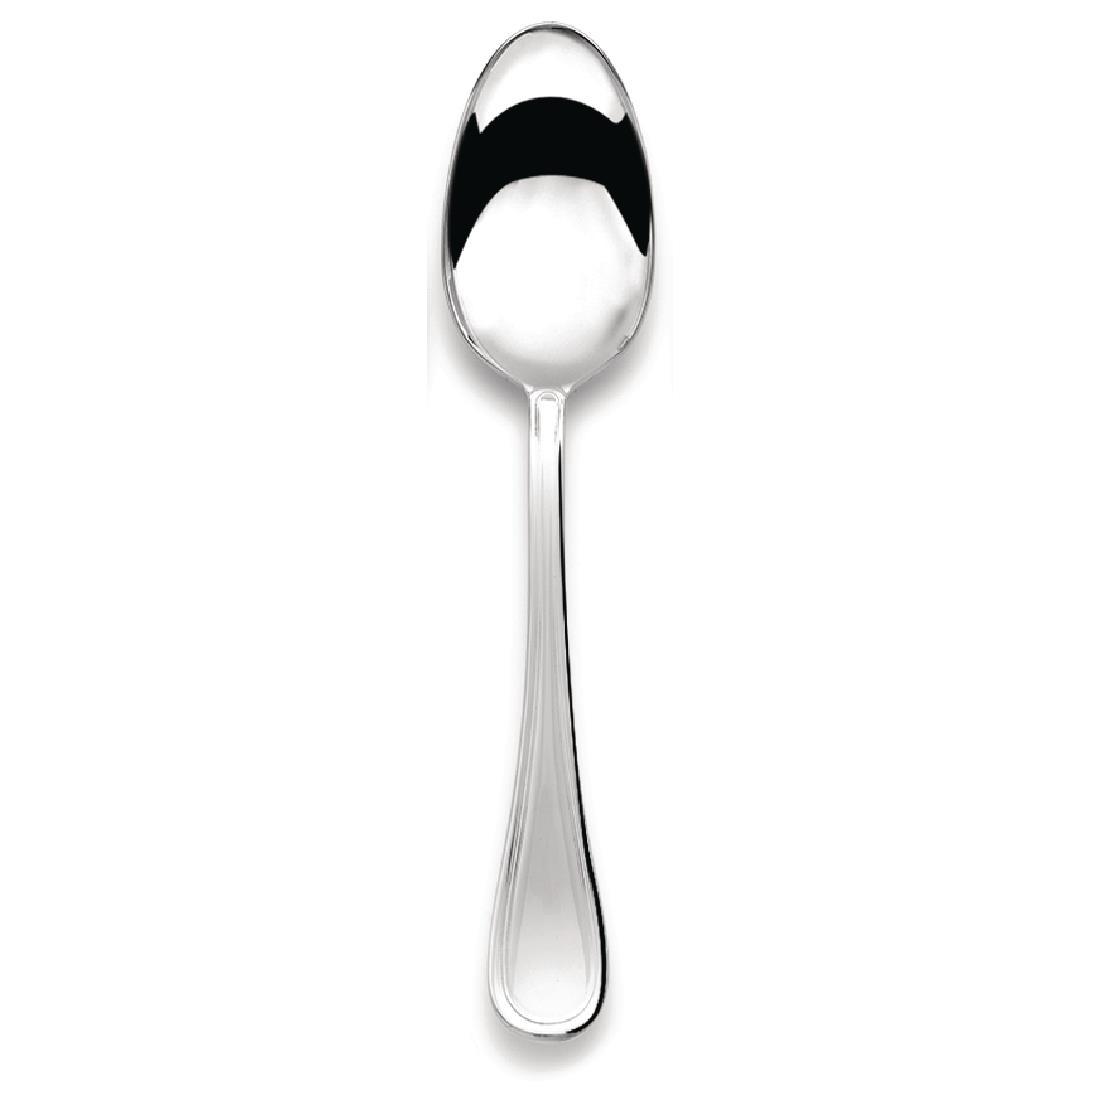 Elia Reed Tablespoon (Pack of 12) - CL840  - 2